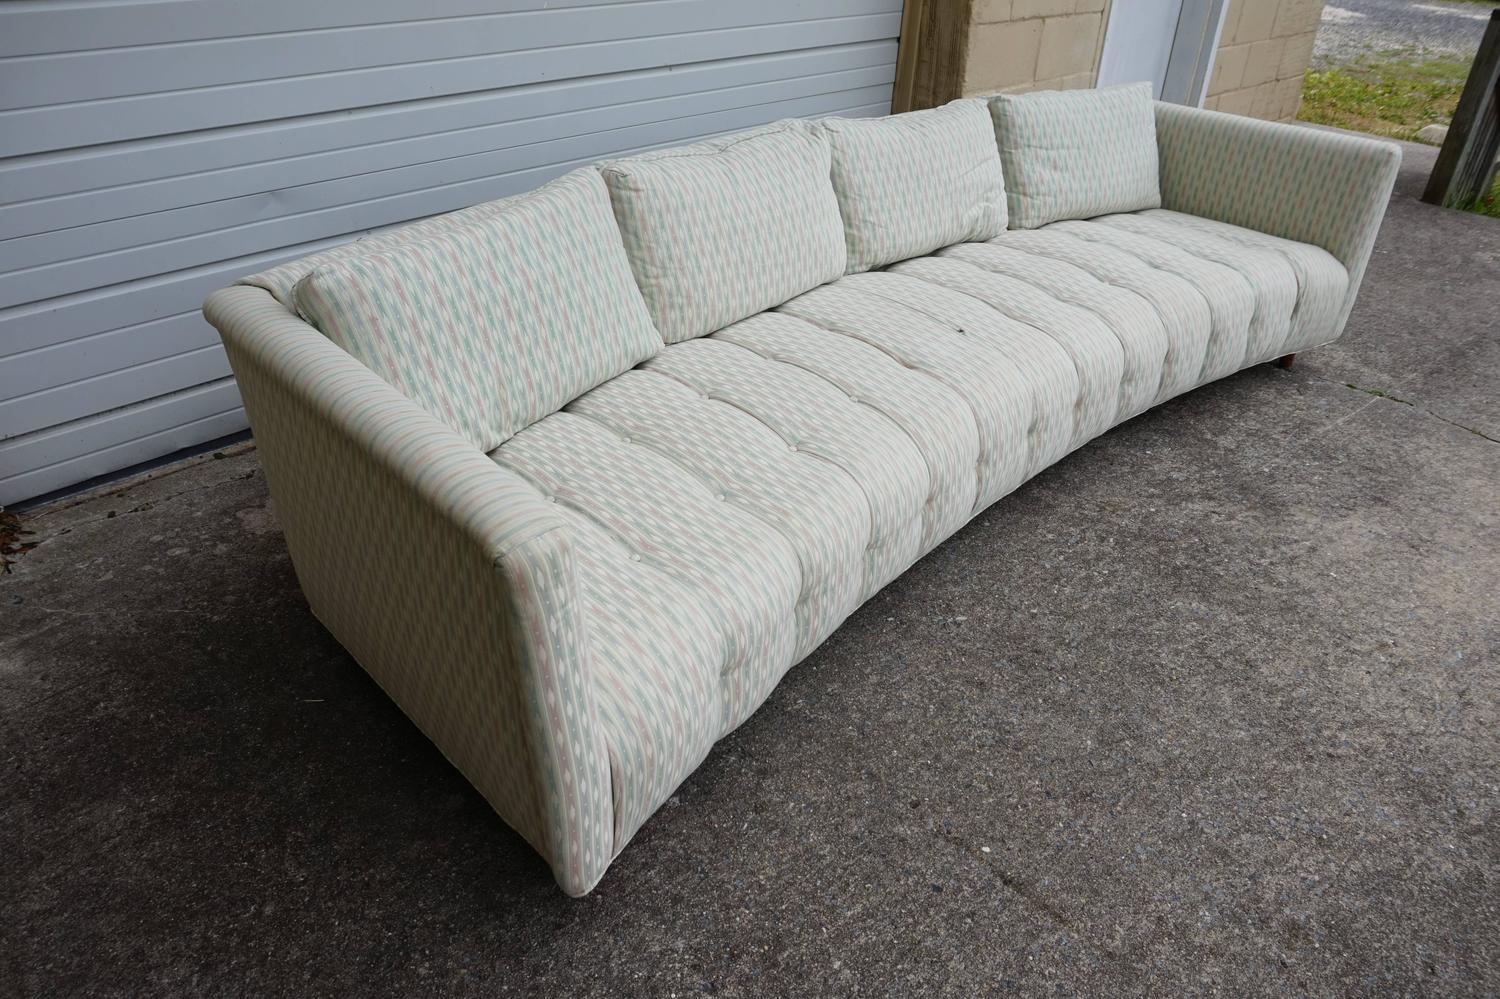 Magnificent Erwin Lambeth Long Low Curved Four-Seat Sofa ...